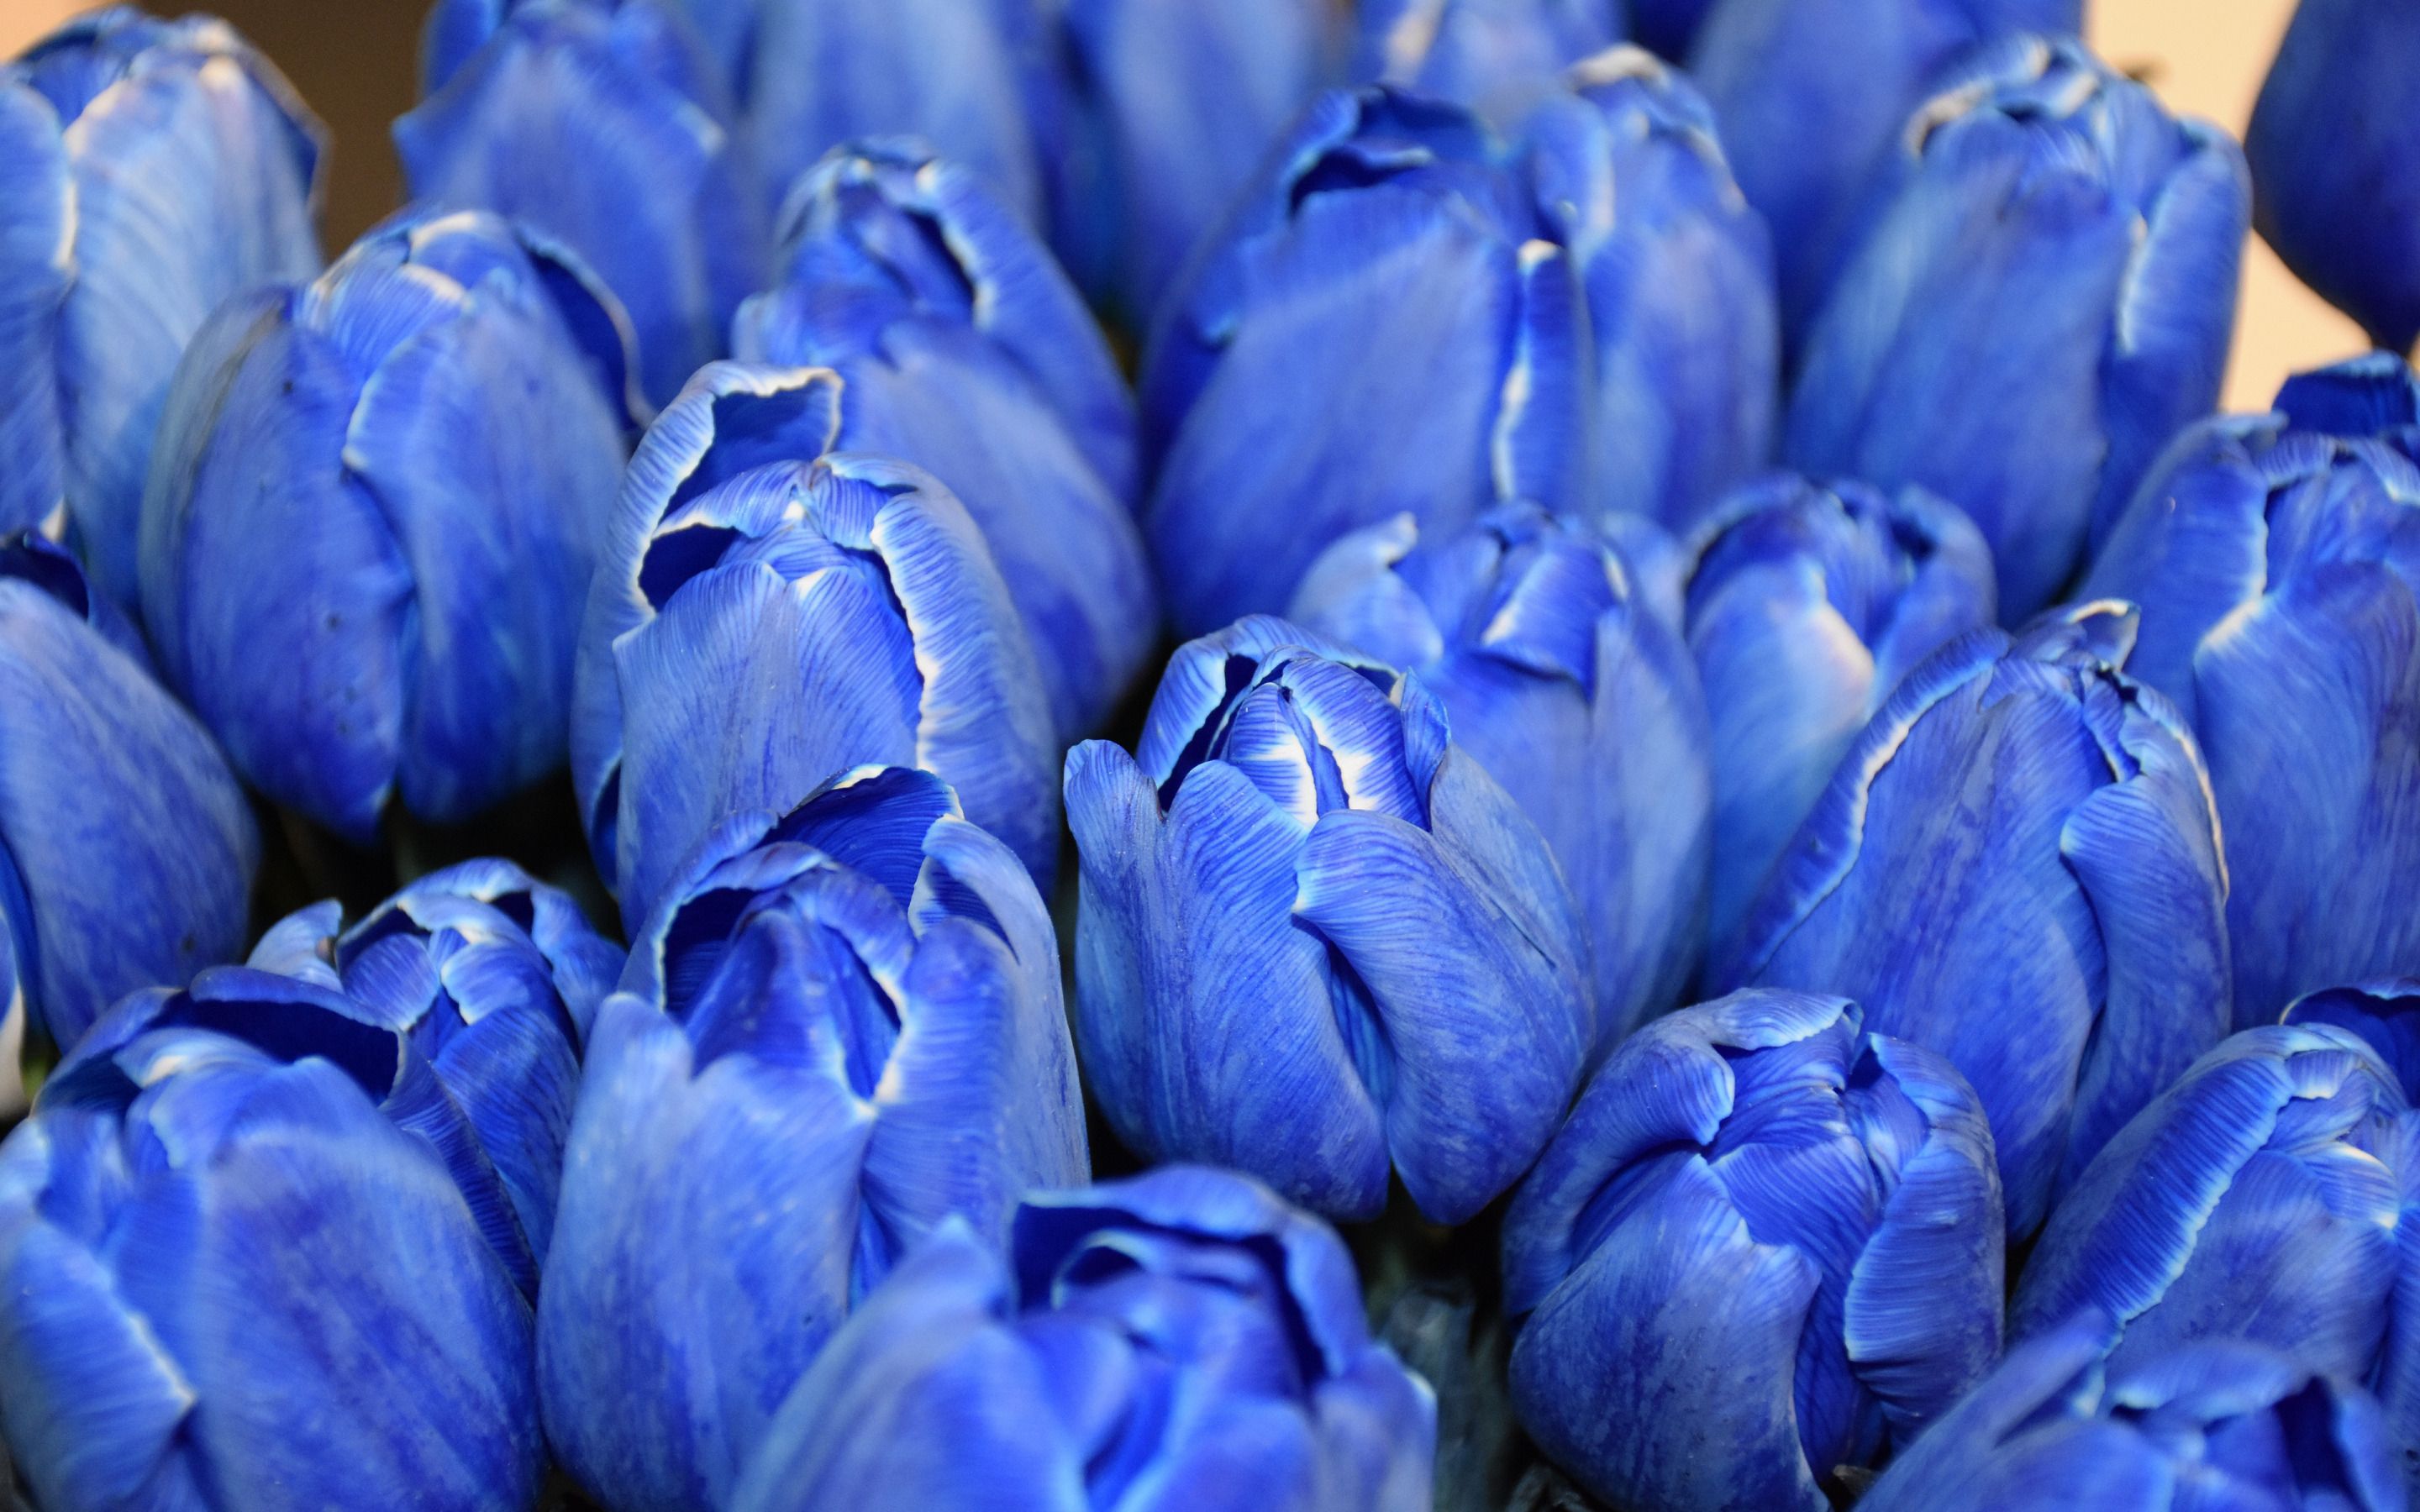 Download wallpaper blue tulips, tulip buds, blue flowers, tulips